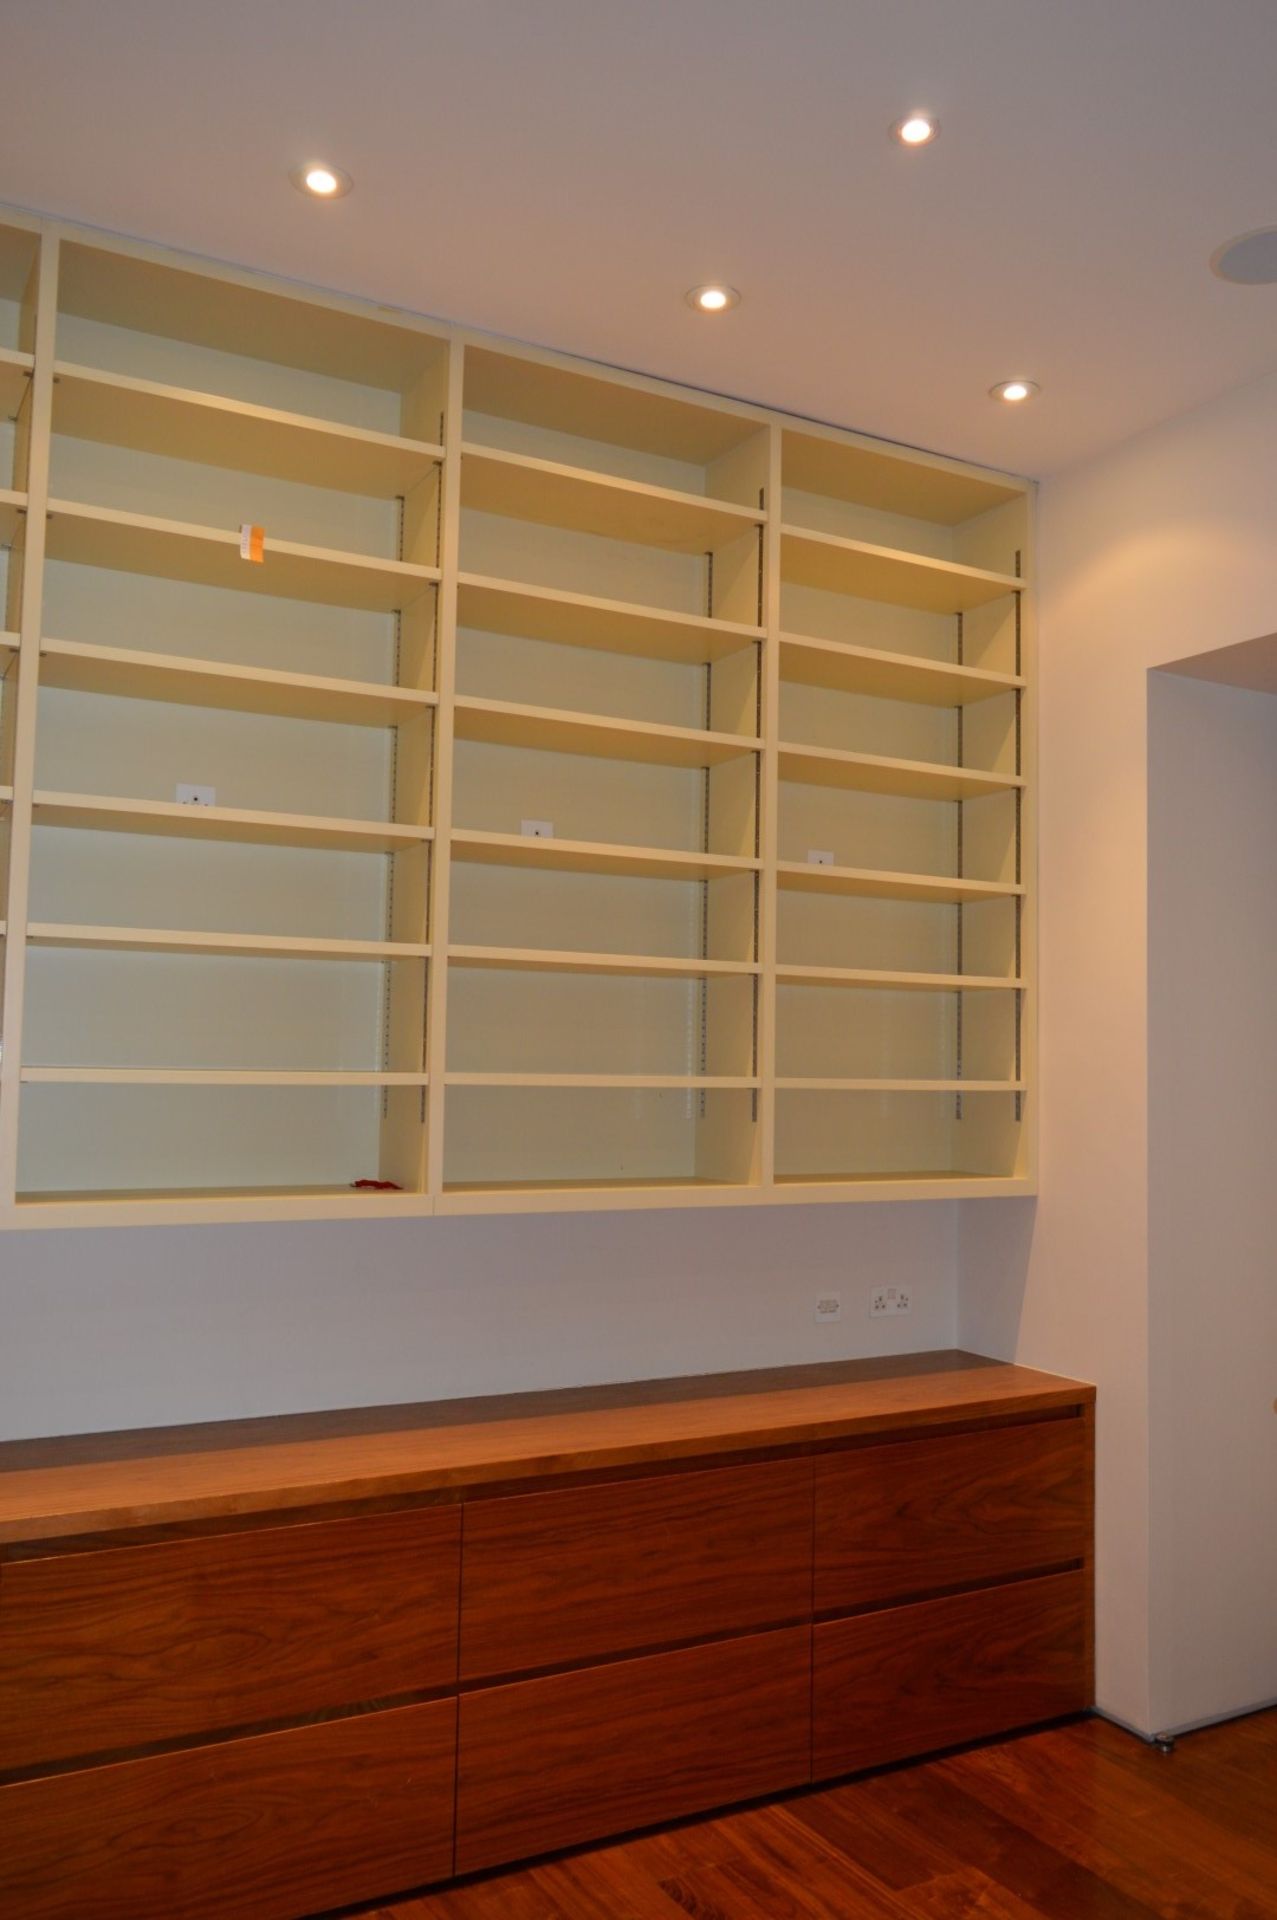 1 x Office Storage Room Including Two Sections of Adjustable Storage Shelvings and Oak Sideboard - Image 12 of 18